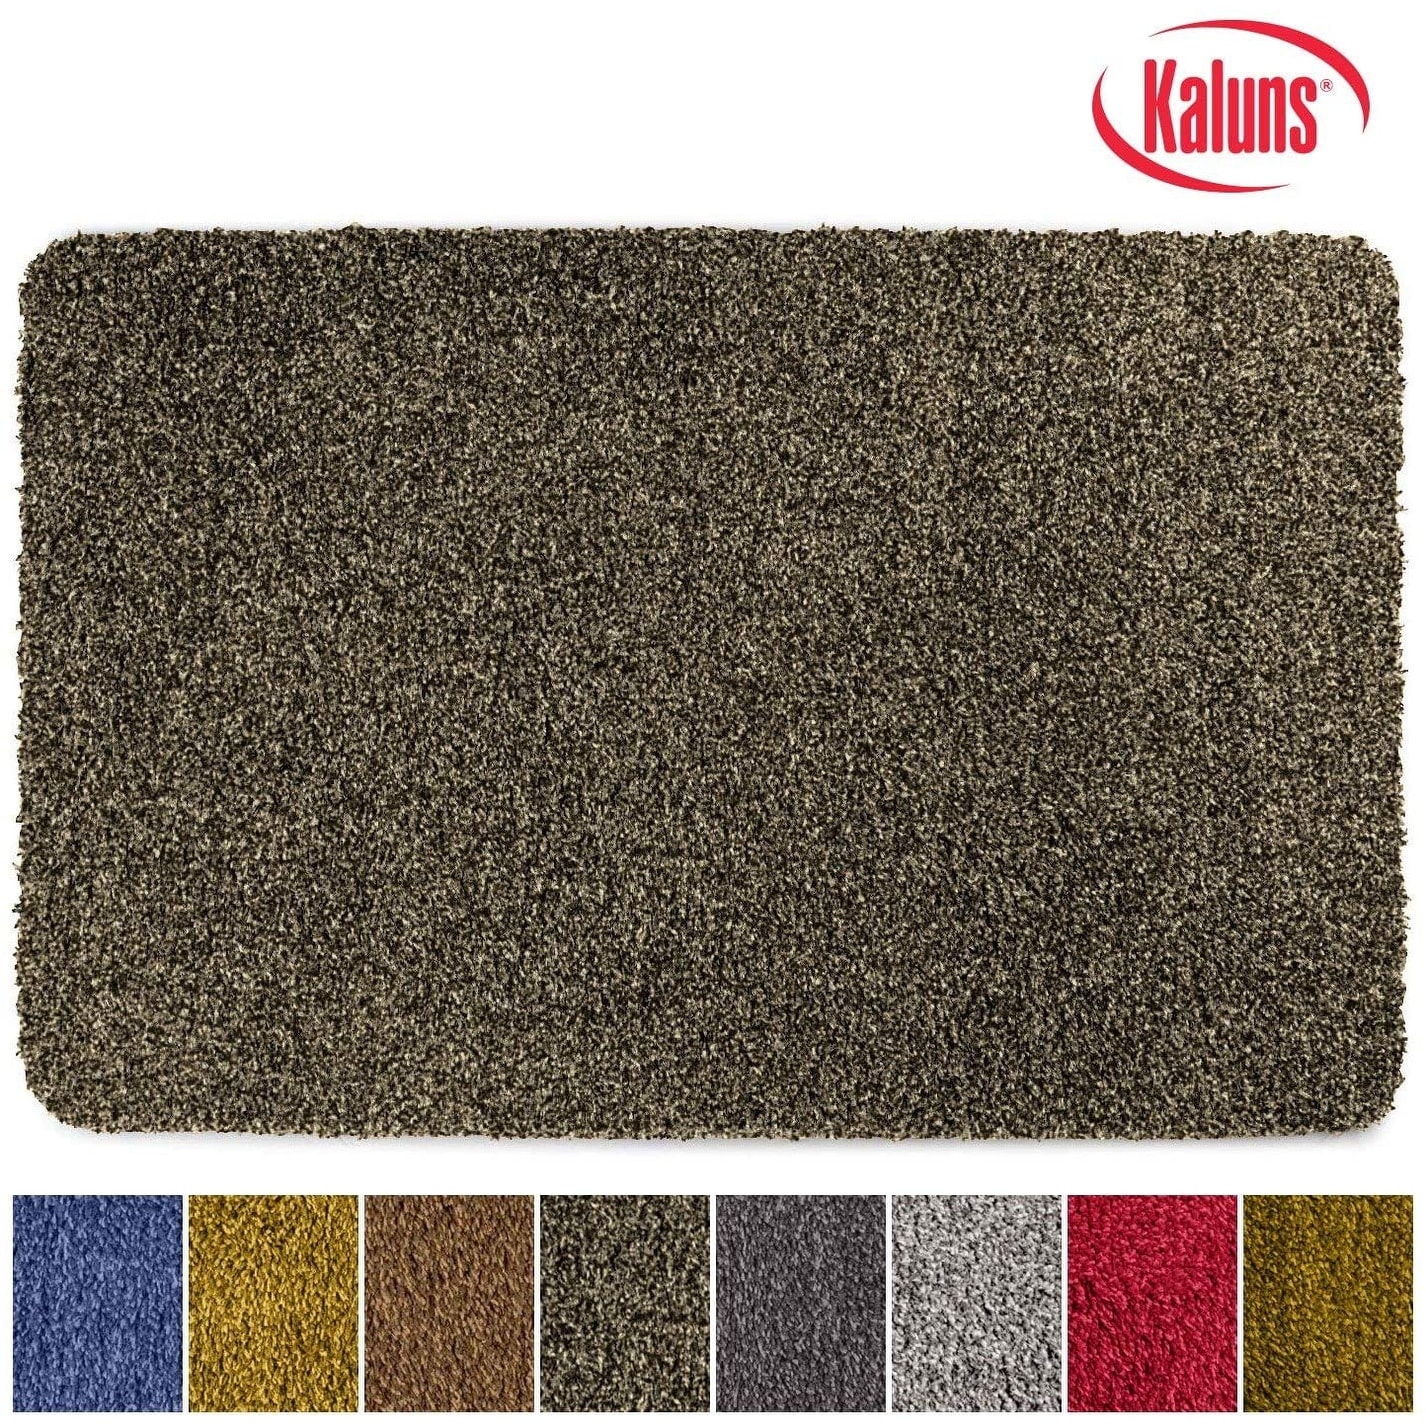 https://ak1.ostkcdn.com/images/products/is/images/direct/e484b286950d64680bb0c3d7f4f612cae03afc28/Kaluns-Door-Mat%2C-Doormats-for-Entrance-Way%2C-Non-Slip-PVC-Waterproof-Backing%2C-Super-Absorbent%2C-Machine-Washable-%283%27x6%27-Large%29.jpg